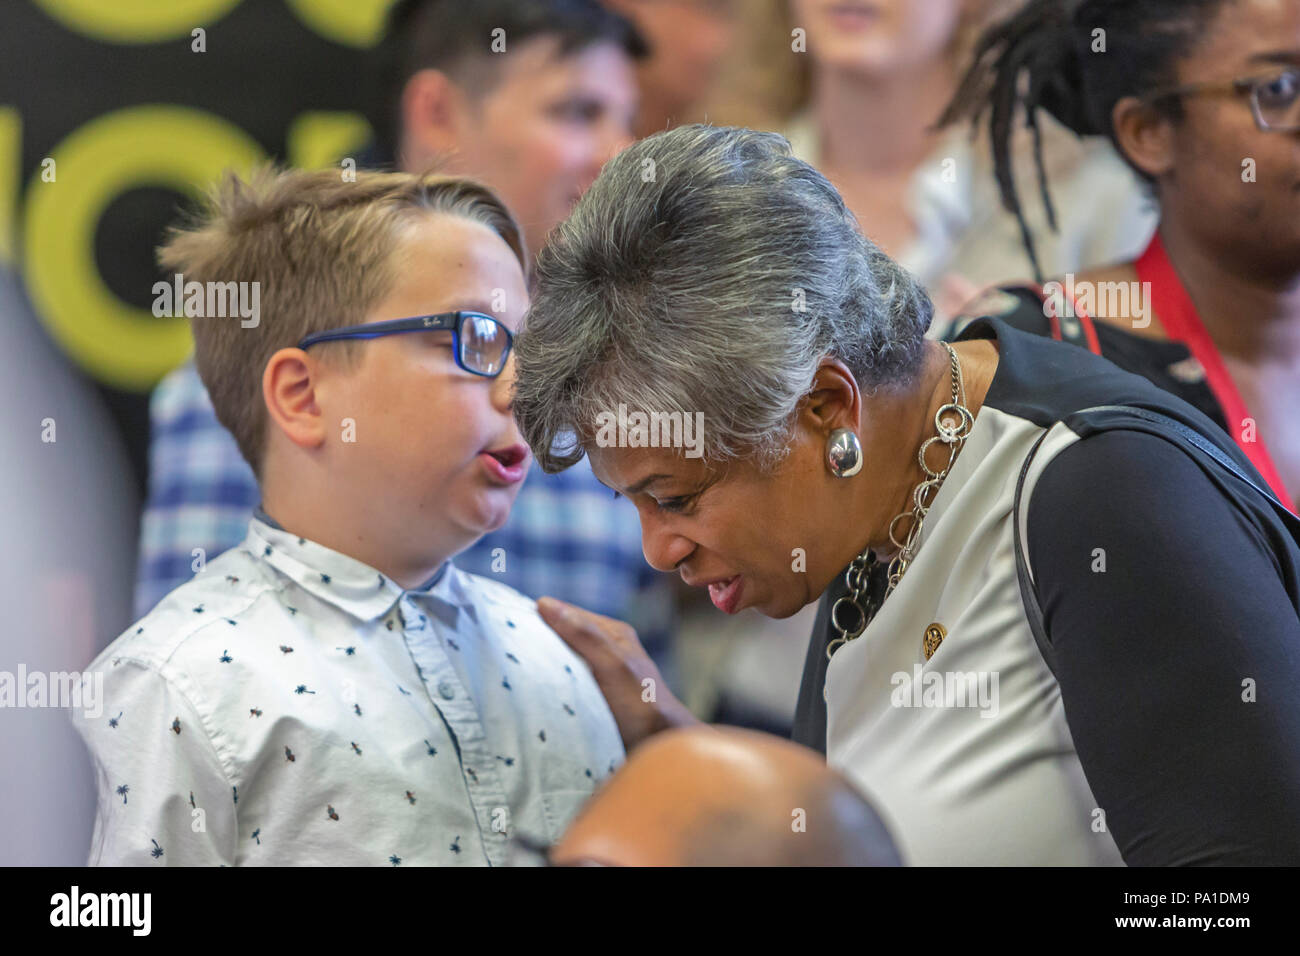 Detroit, Michigan USA - 20 July 2018 - Congresswoman Brenda Lawrence speaks with a young constituent as union members rally to save their pensions. Credit: Jim West/Alamy Live News Stock Photo